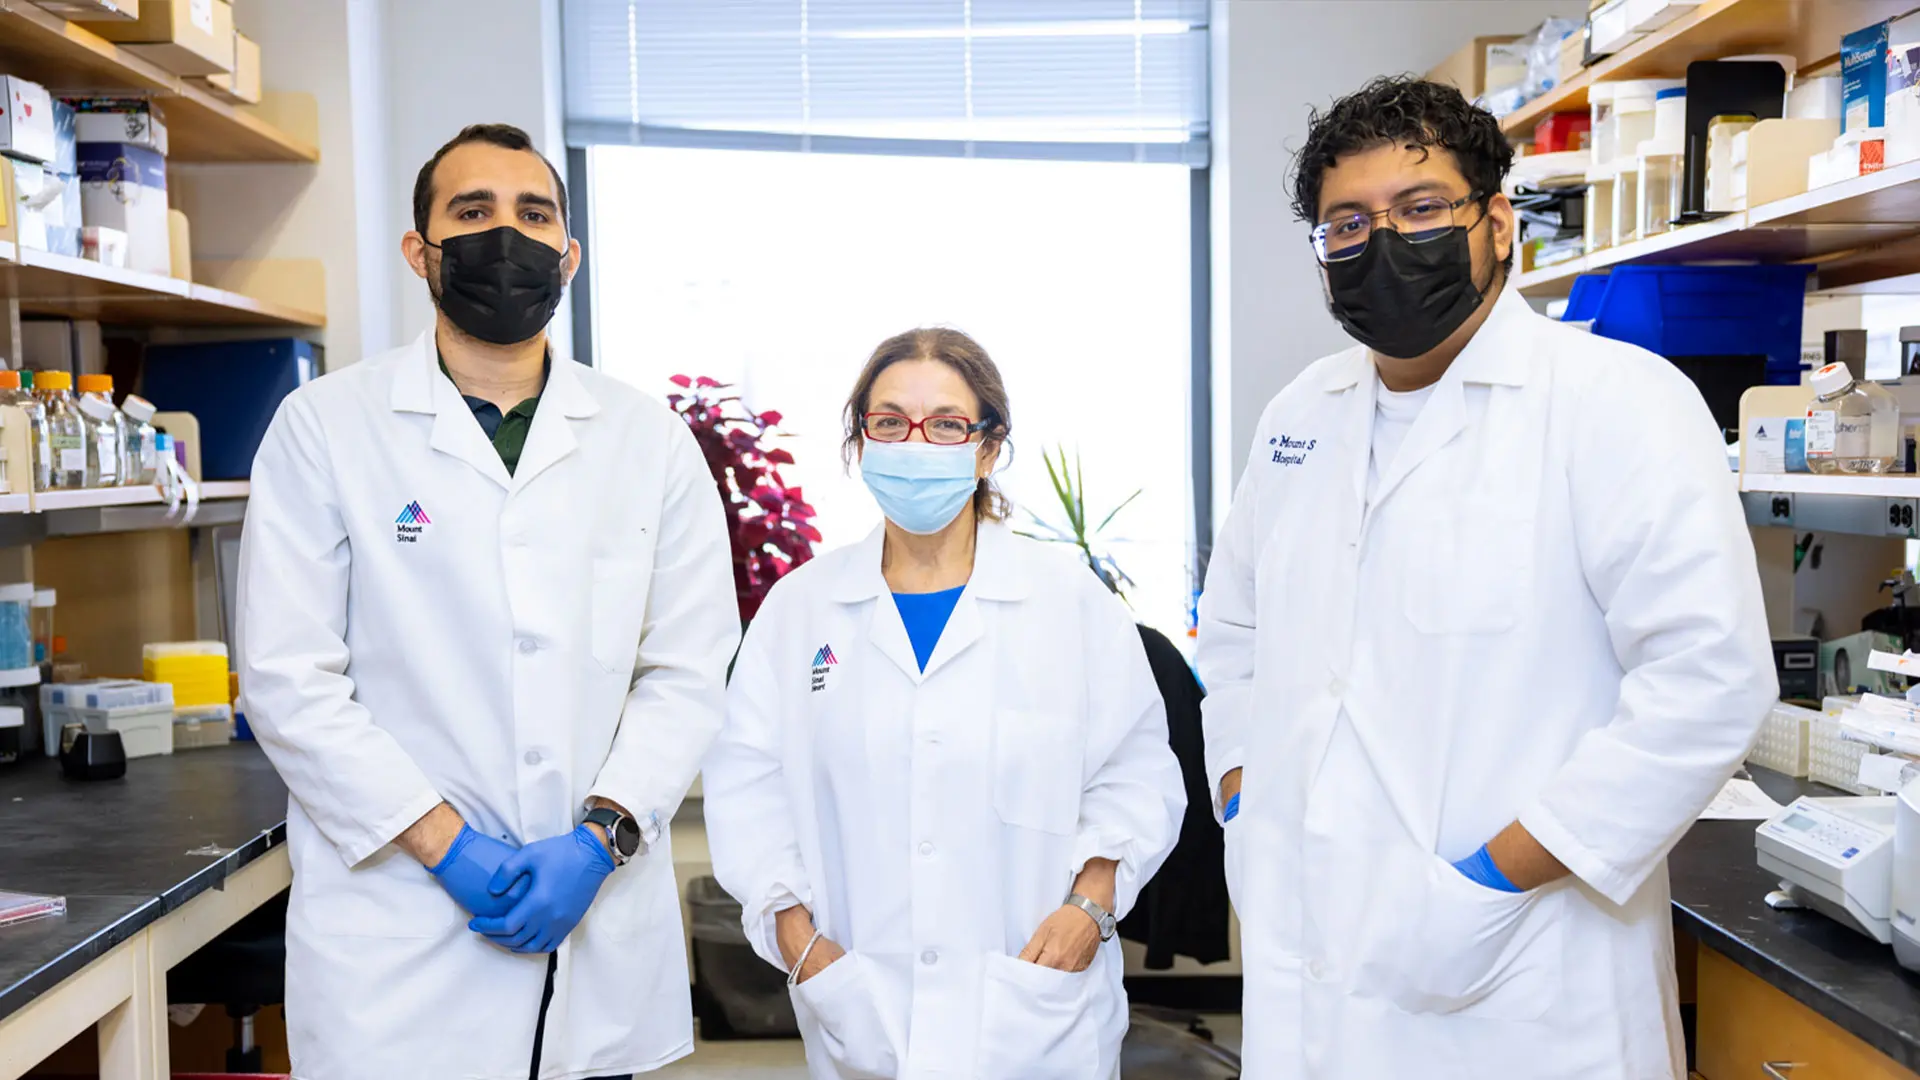 Student Kevin Medina, right, in the lab with Maria Curotto de Lafaille, PhD, and Weslley Fernandes Braga, PhD